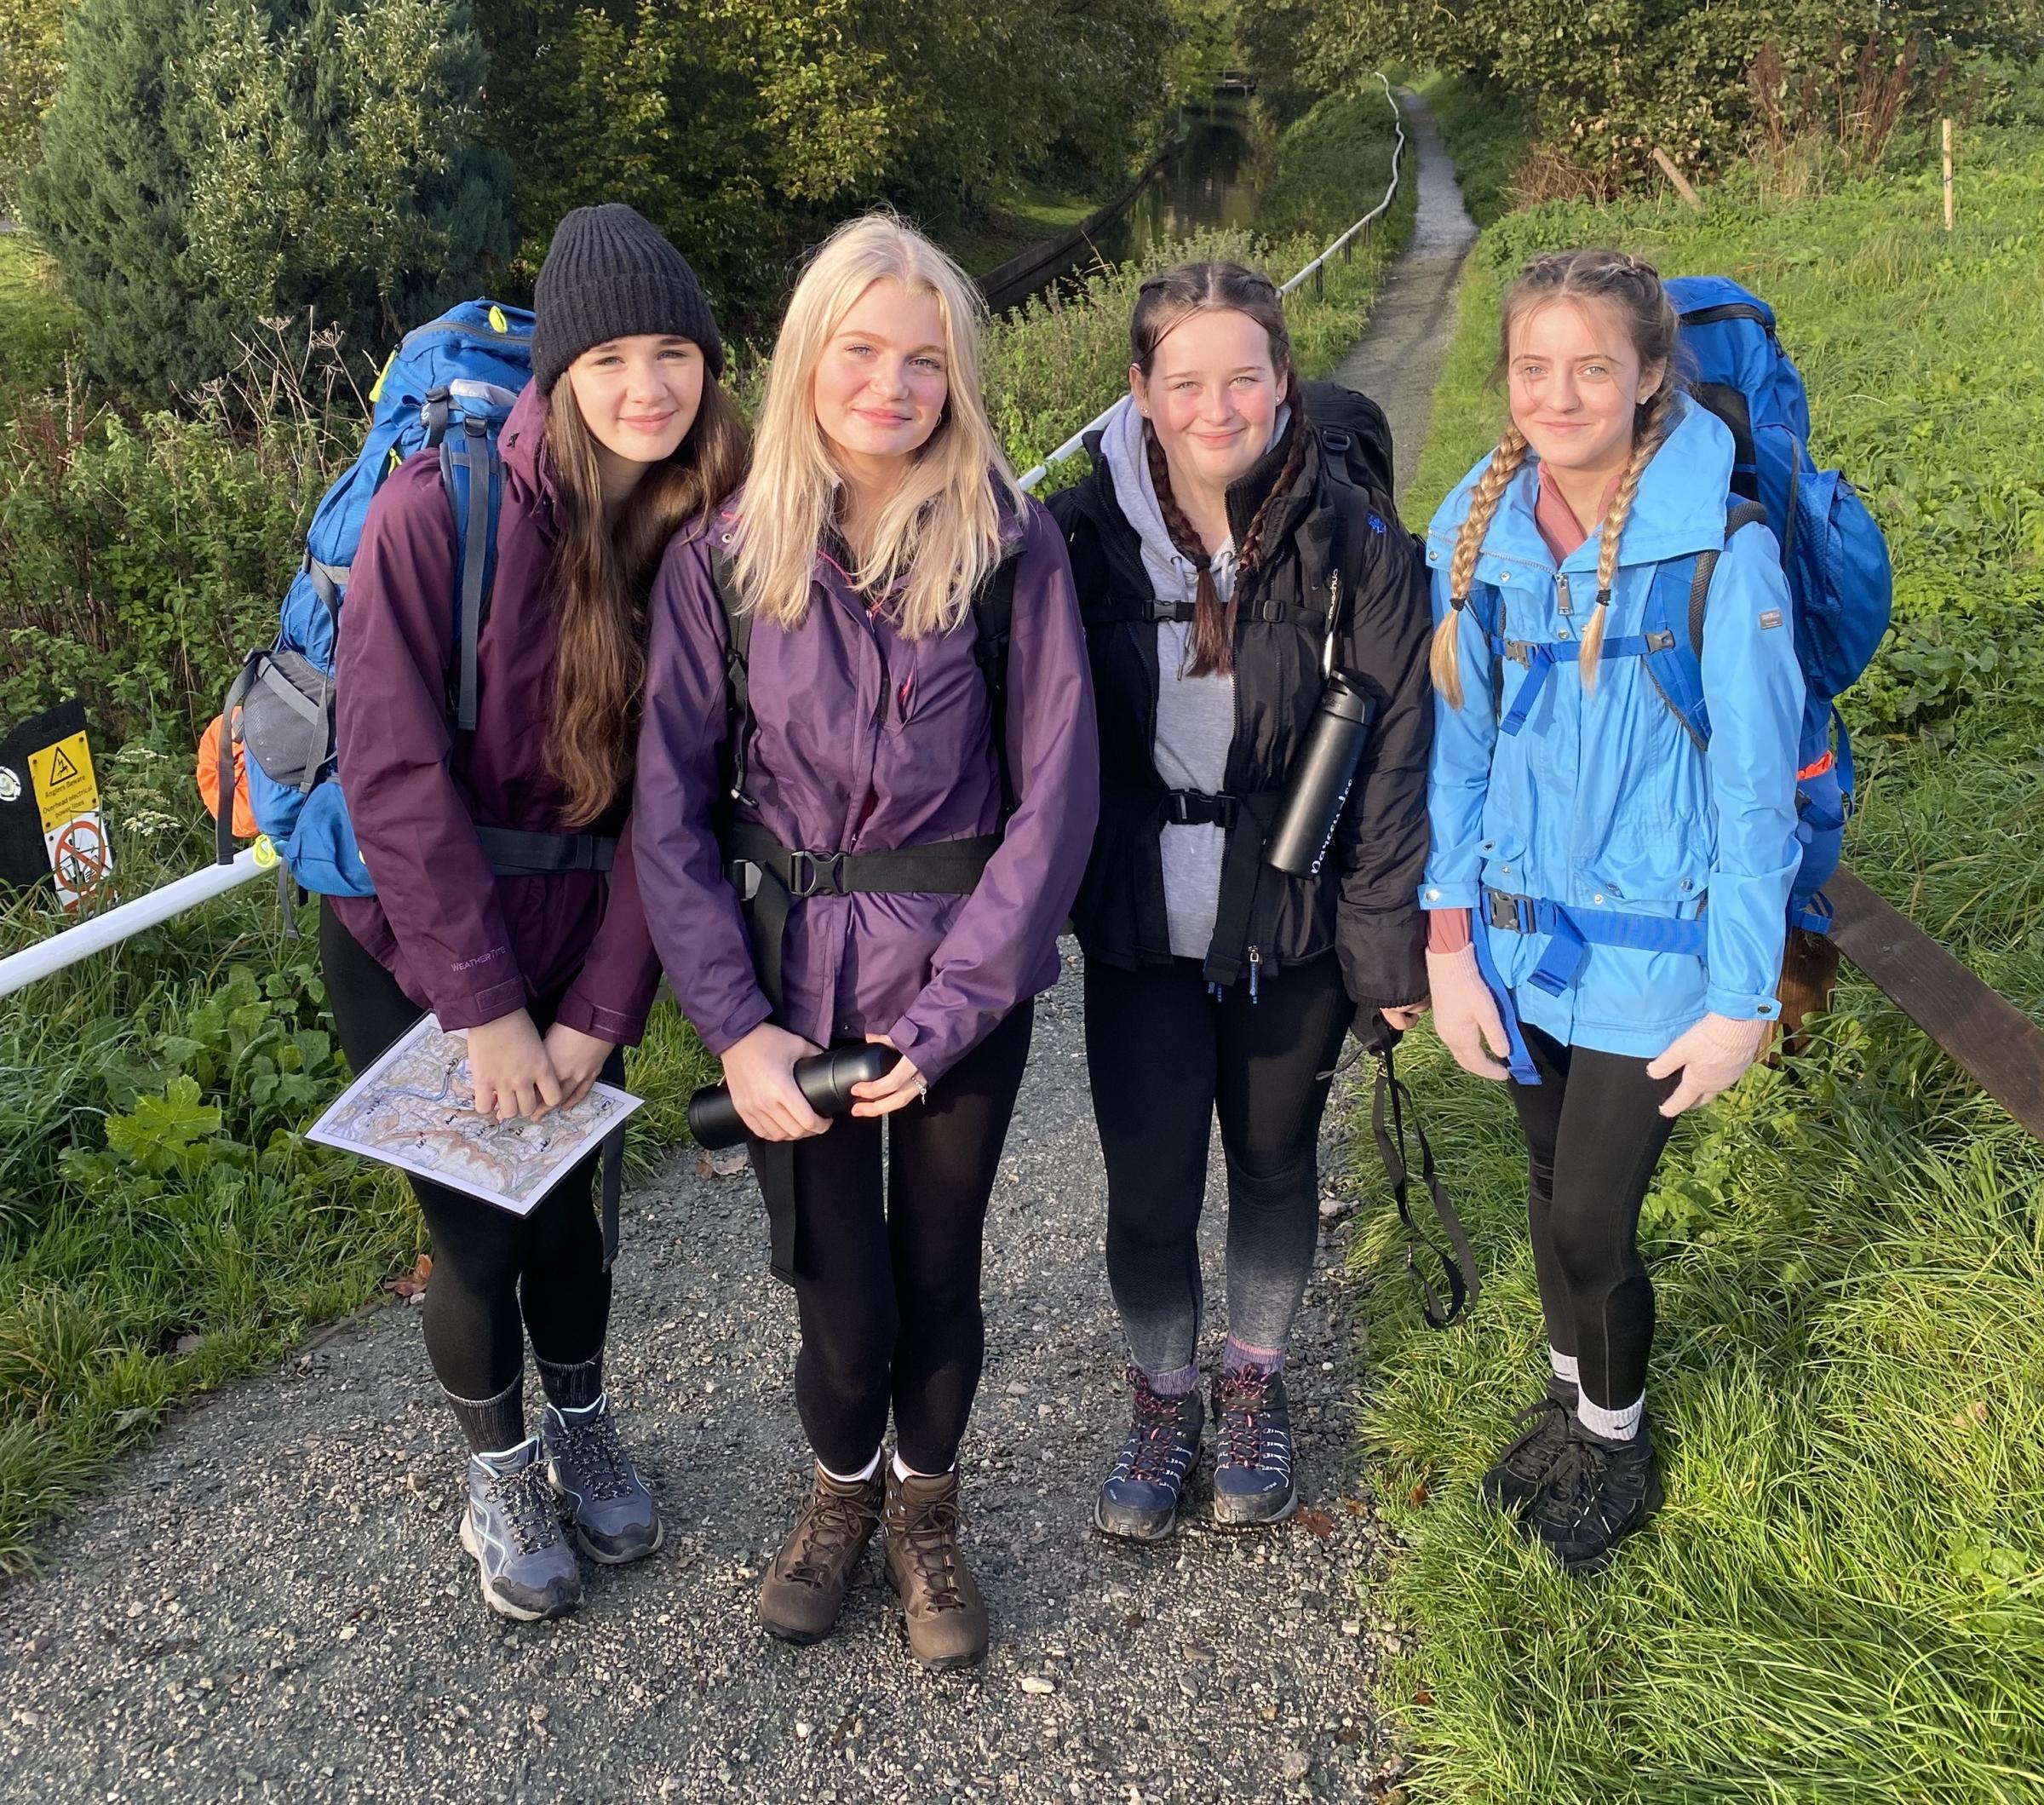 Hollie Meacock, Emily OConnor, Darcey English and Magdalena Kryszczuk put their navigation skills to the test.